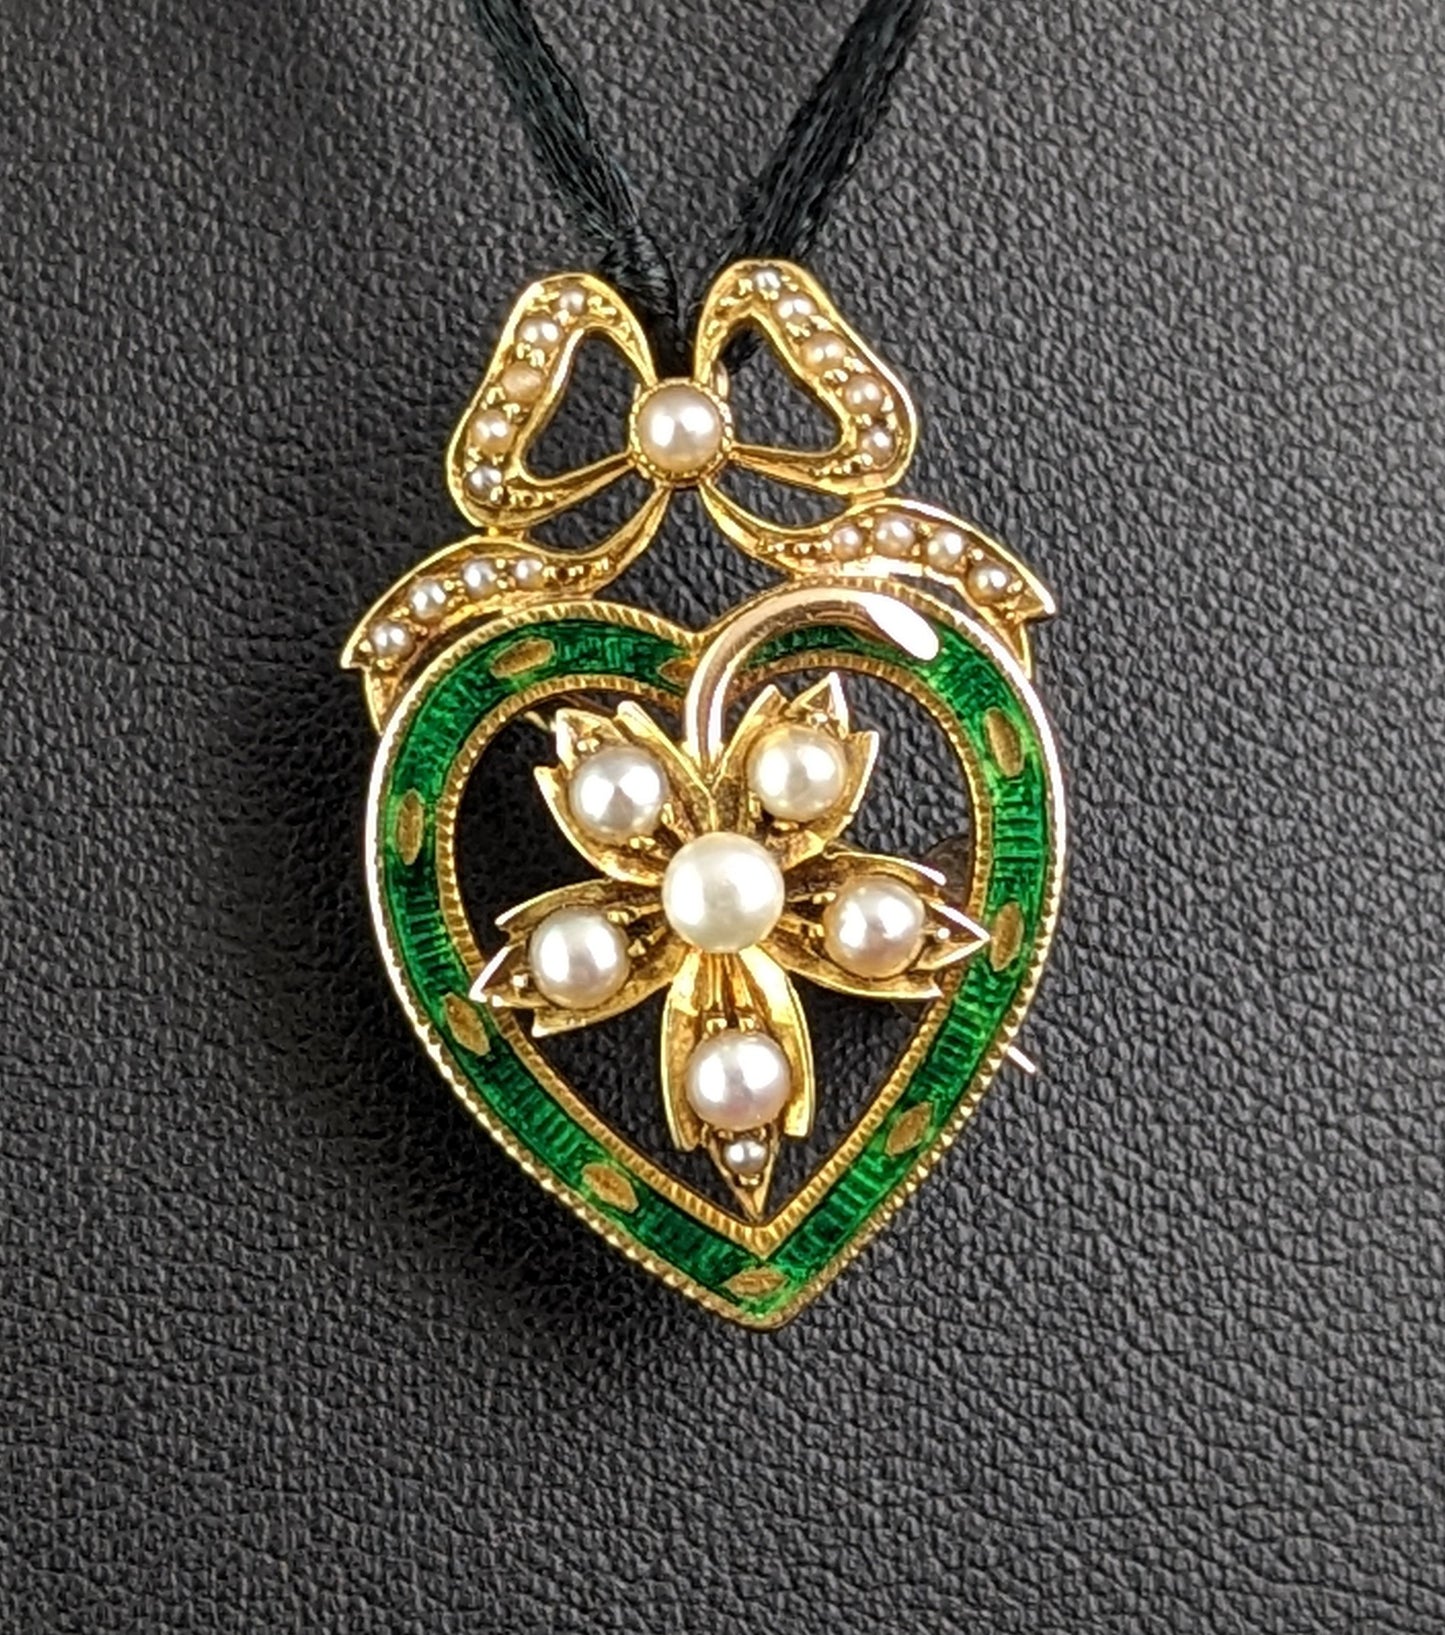 Antique Green Enamel and Pearl Heart pendant, 9ct gold